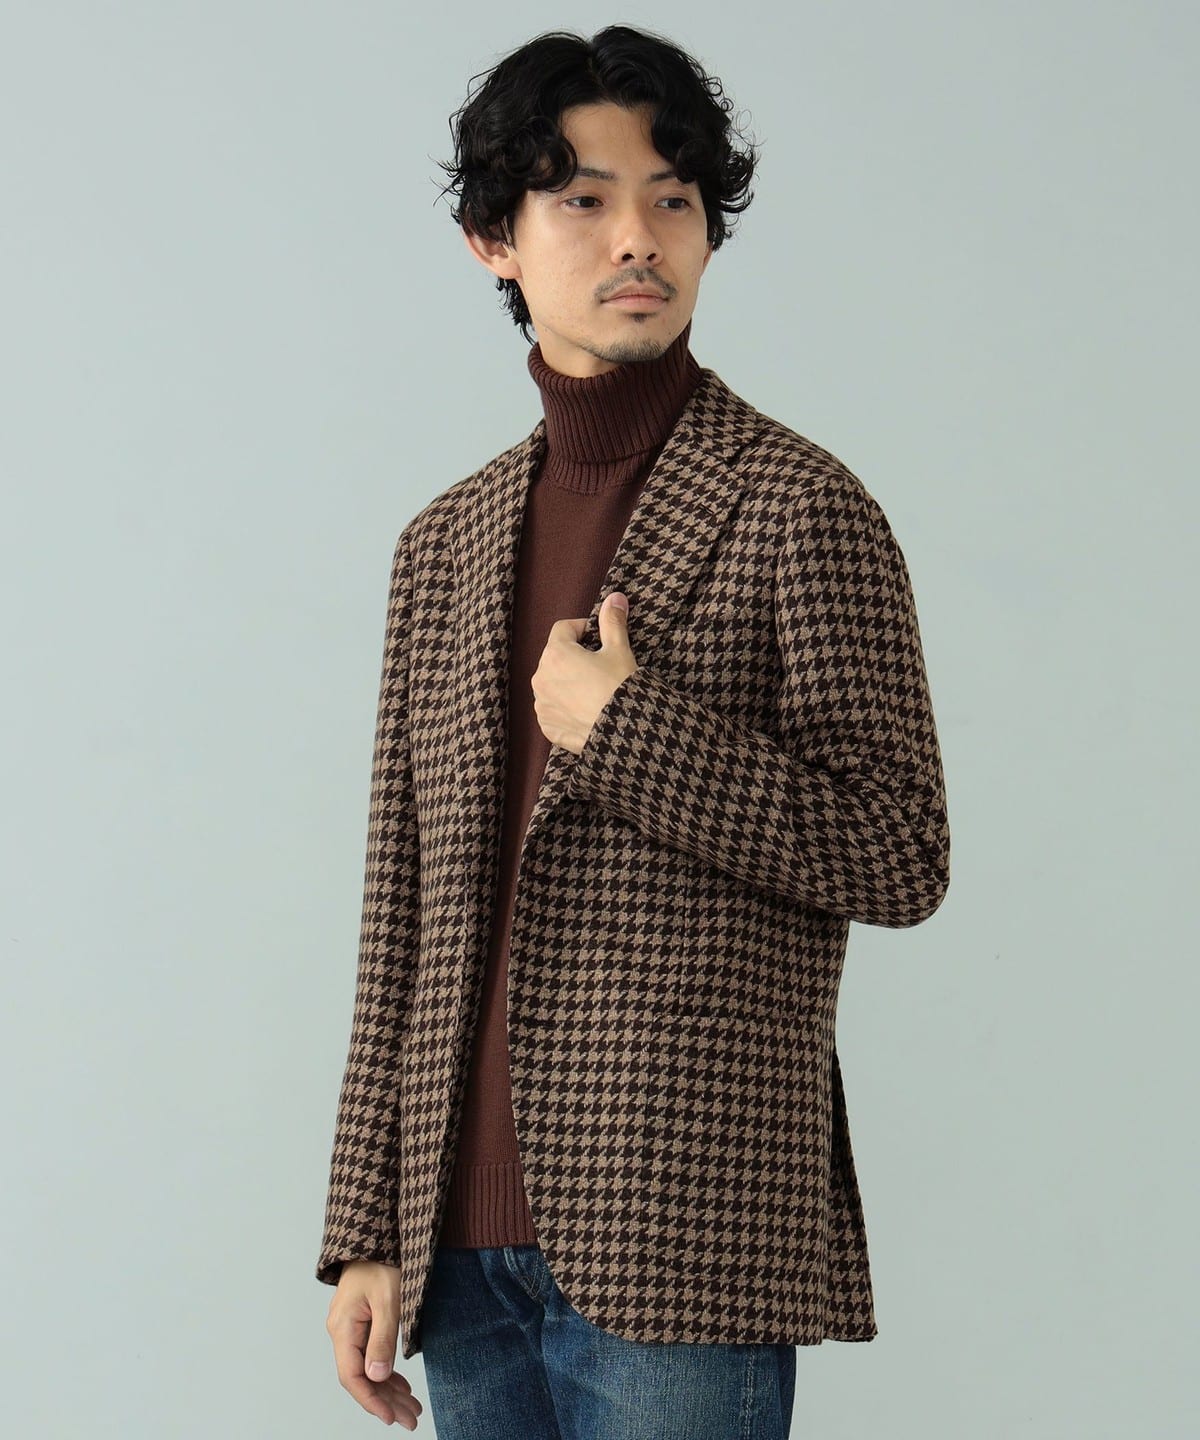 [Outlet] BEAMS F /EASY B OTTO LI mixed fabric houndstooth jacket